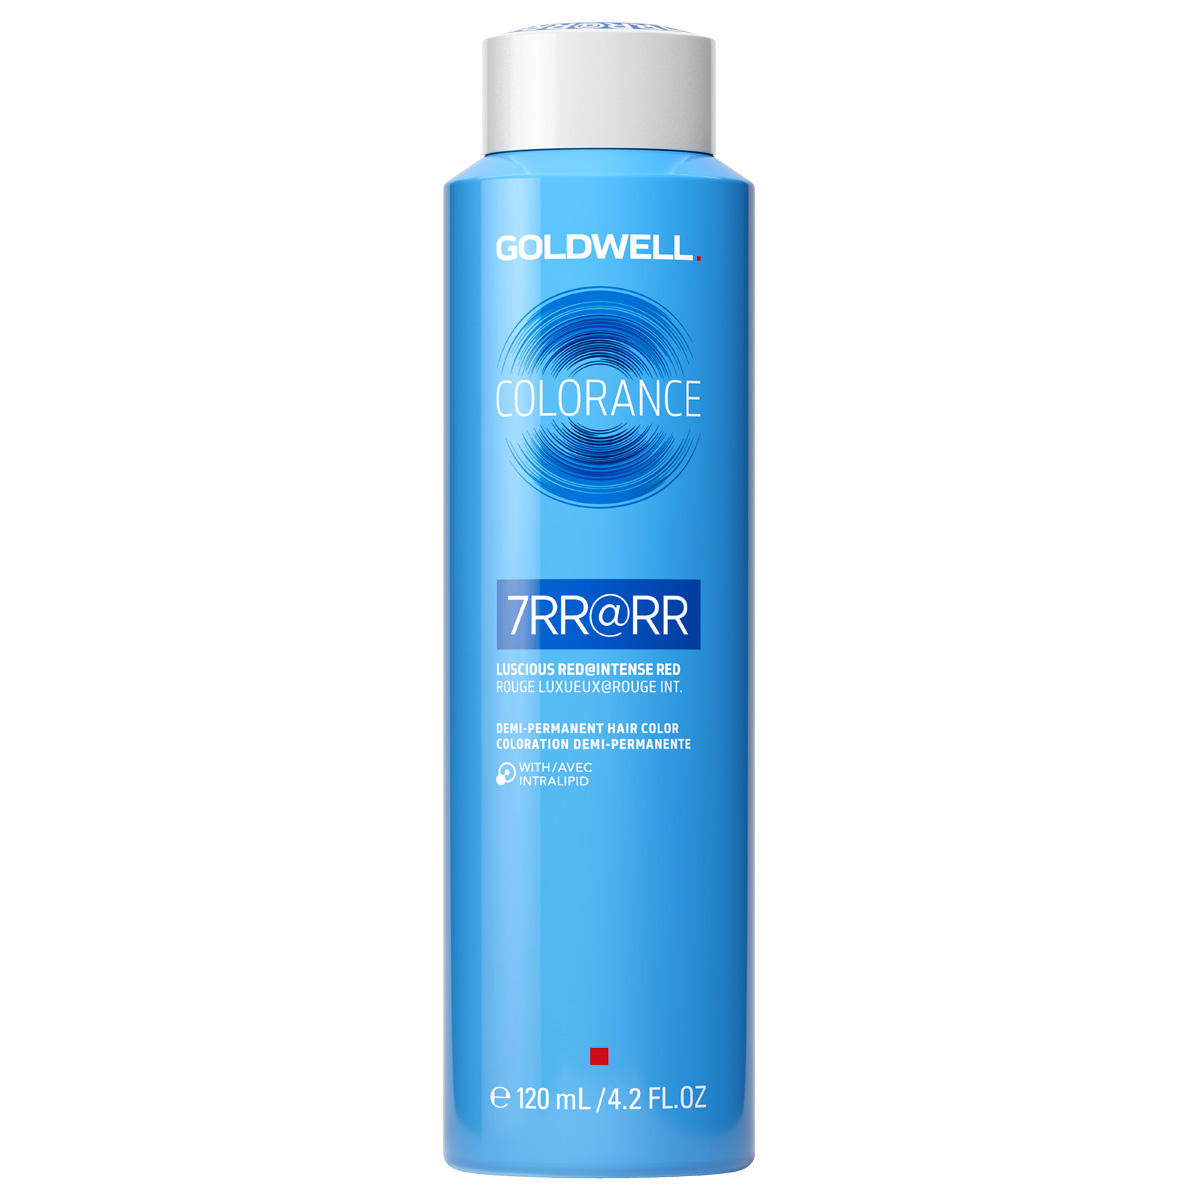 Goldwell Colorance Demi-Permanent Hair Color 7RR@RR Luscious Red@Intense Red 120 ml - 1